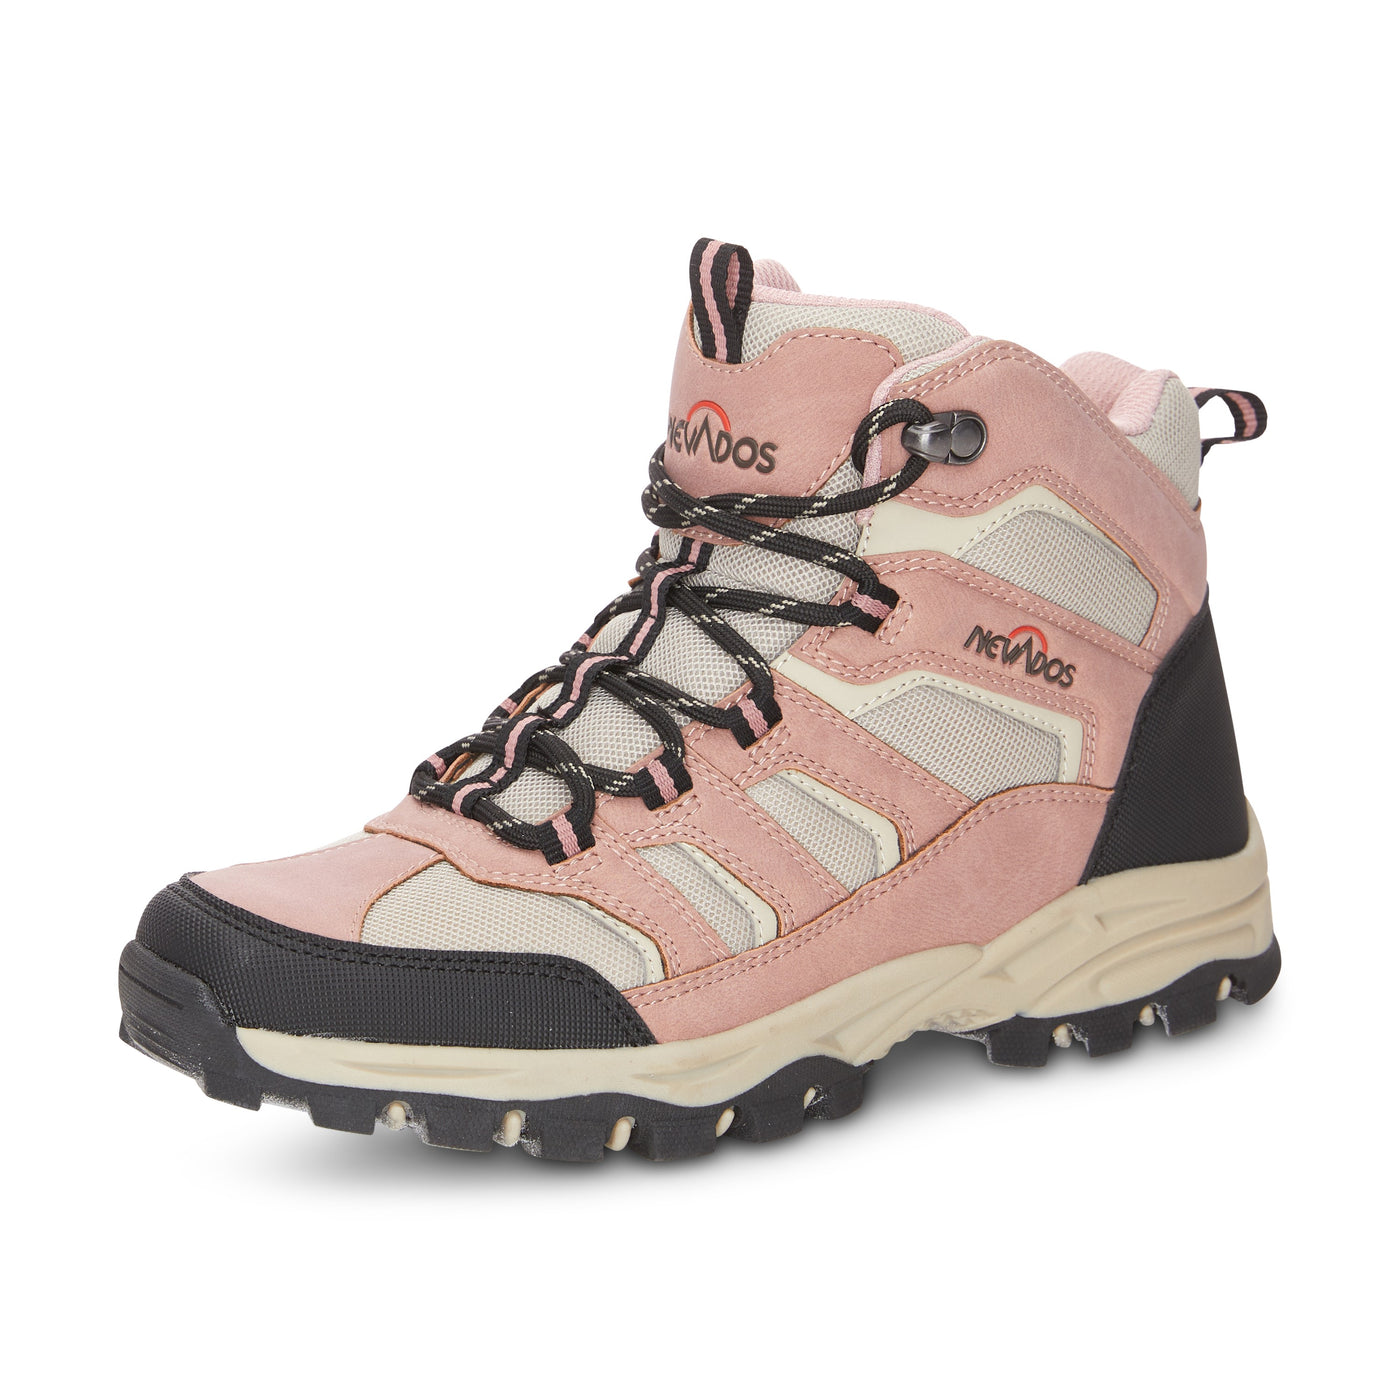 Nevados Claire Mid Women's Hiking Sneaker